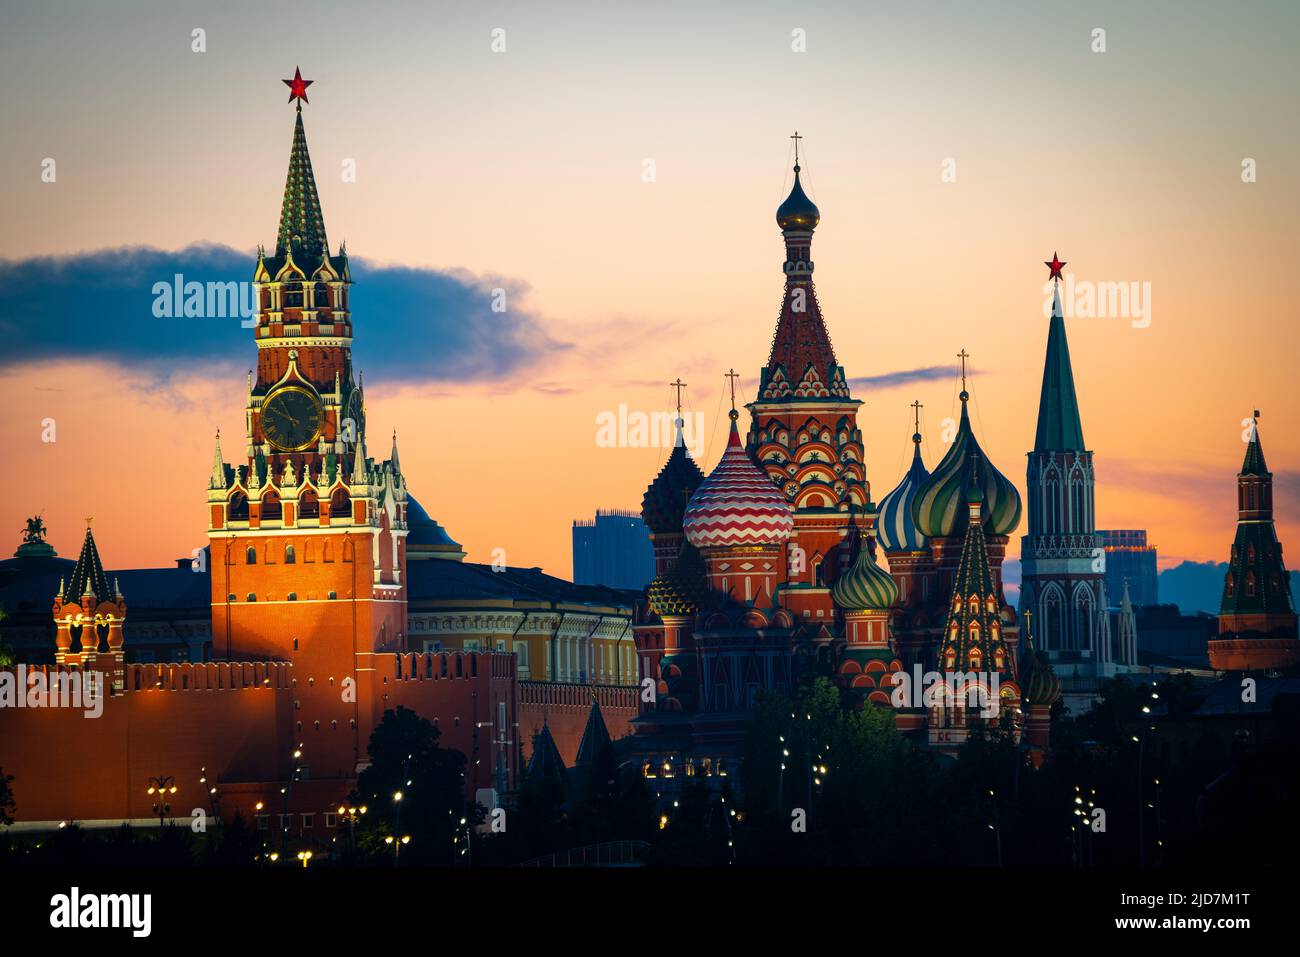 The Moscow Kremlin and St. Basil's Cathedral on Red Square in Moscow, Russia. Landscape at sunset. High quality photo Stock Photo